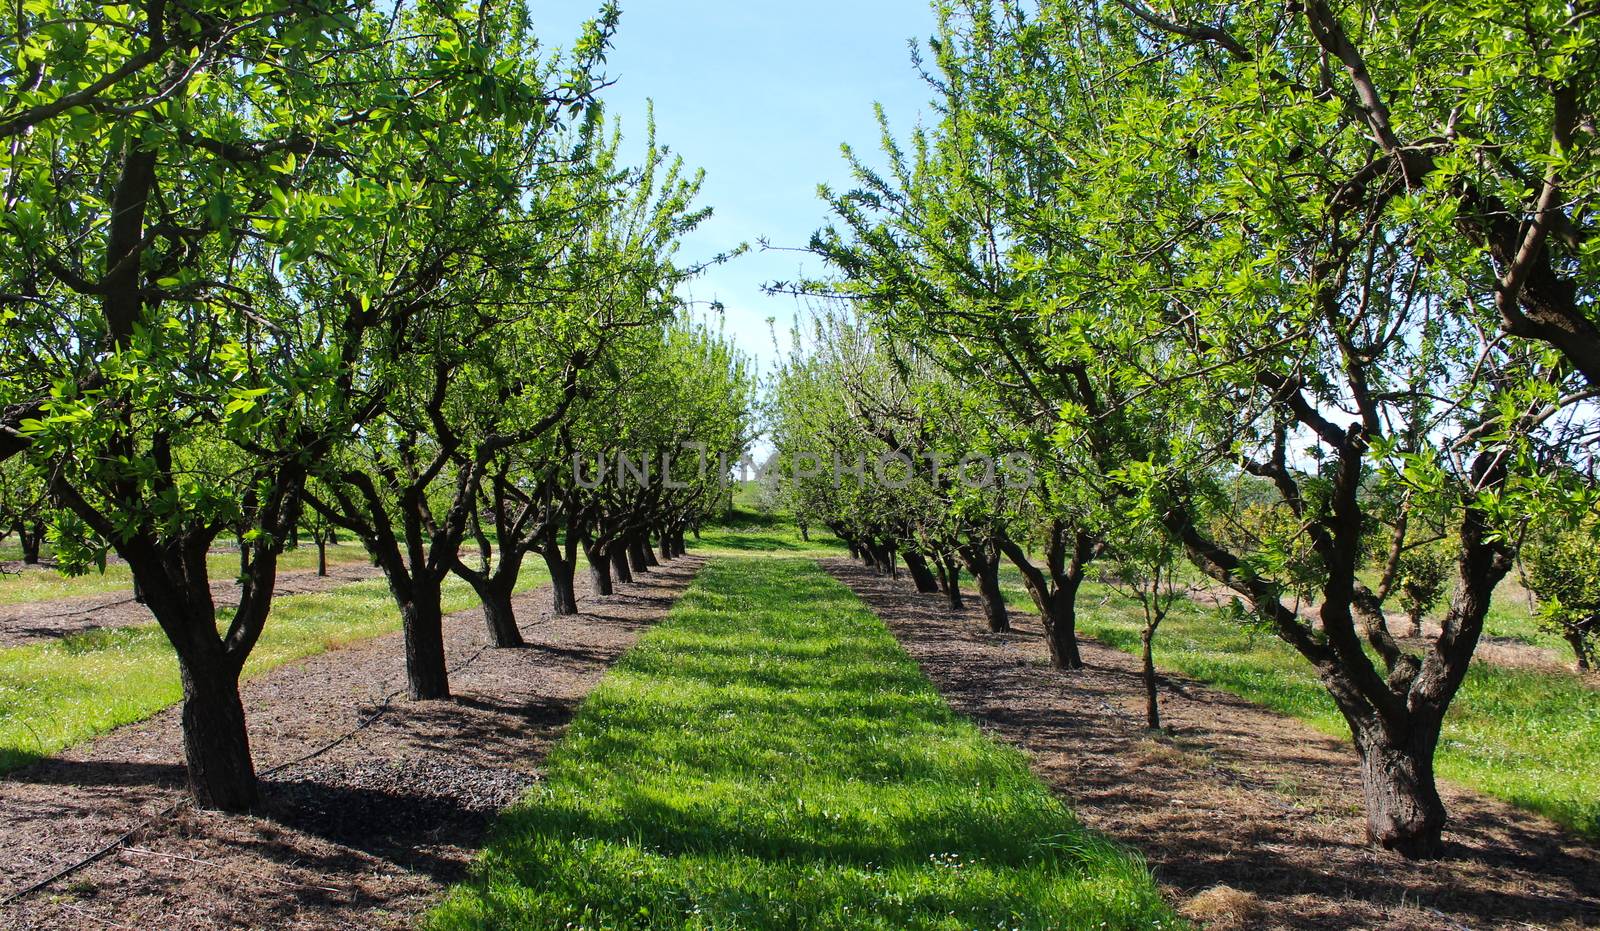 Orchard in the spring before almond blossoms. Between two rows of almond trees. Professional conventional almond orchard. by mahirrov